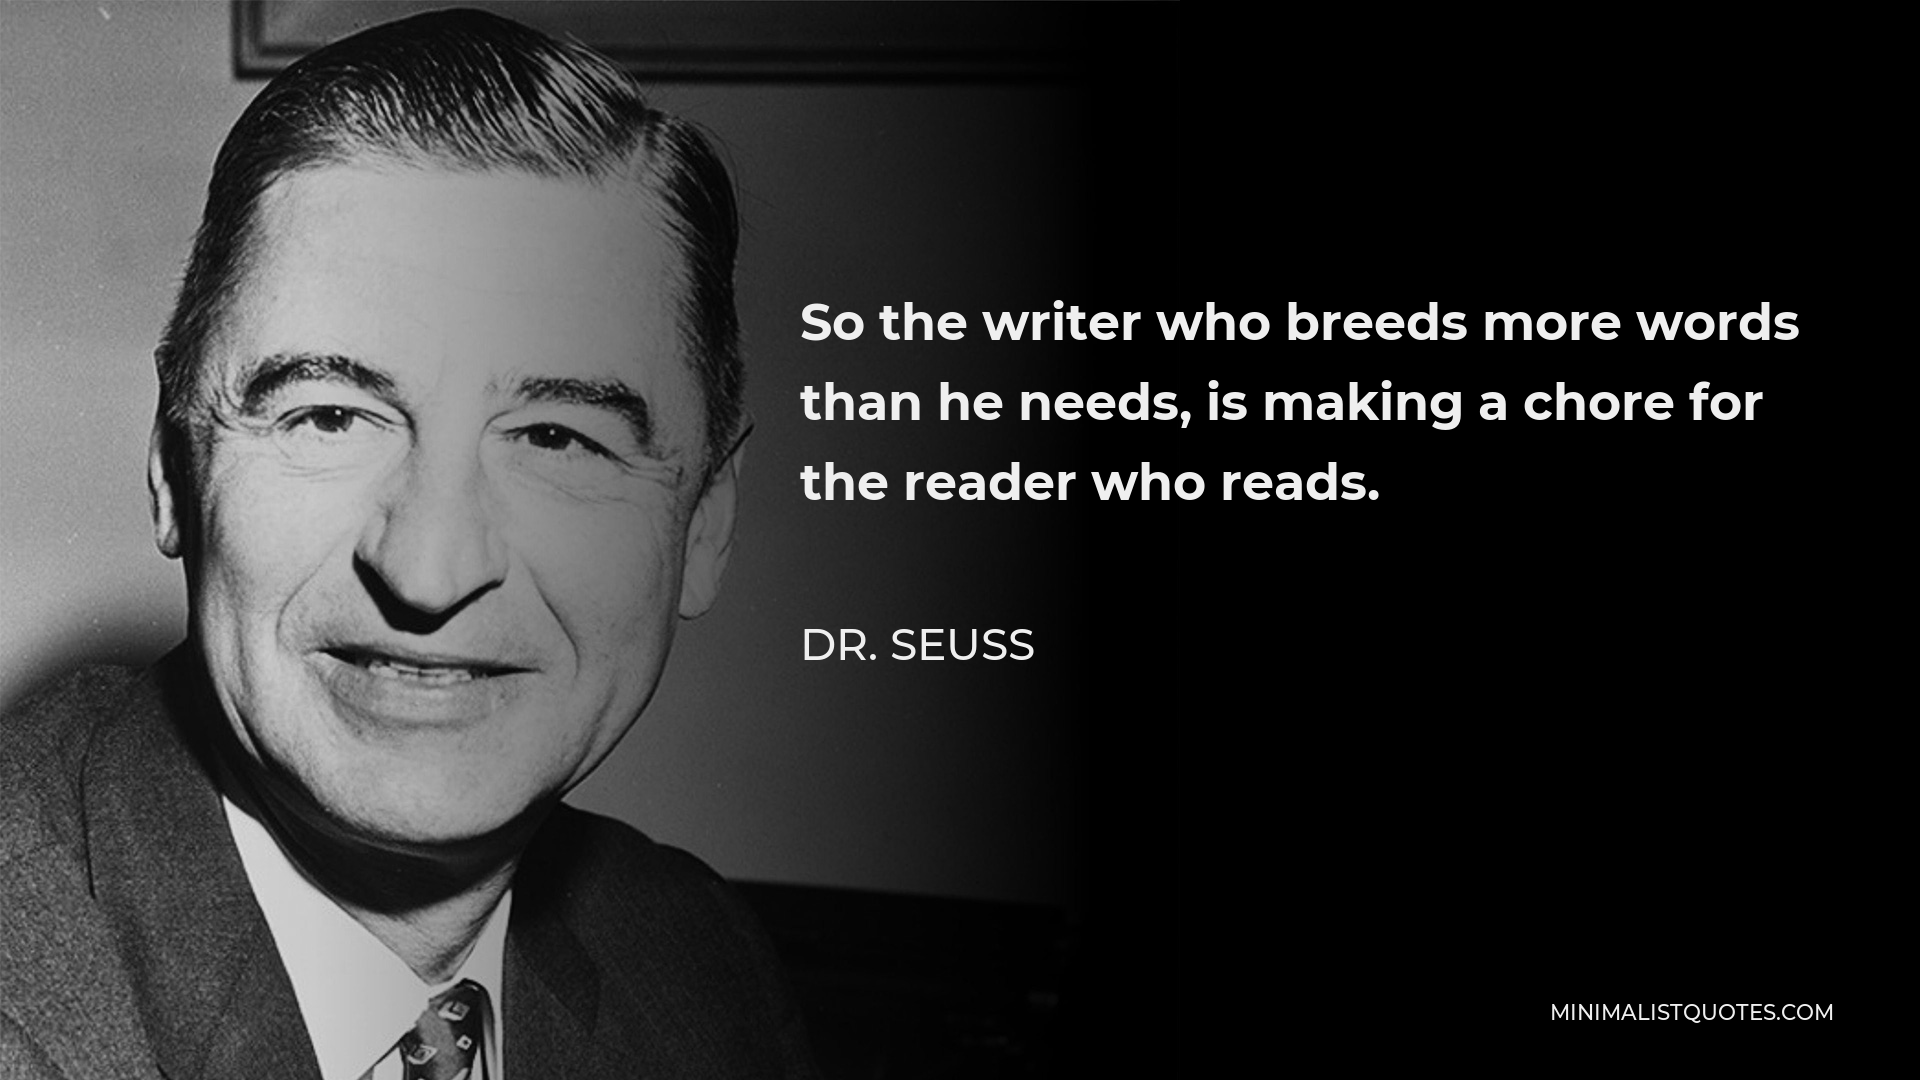 Dr. Seuss Quote - So the writer who breeds more words than he needs, is making a chore for the reader who reads.